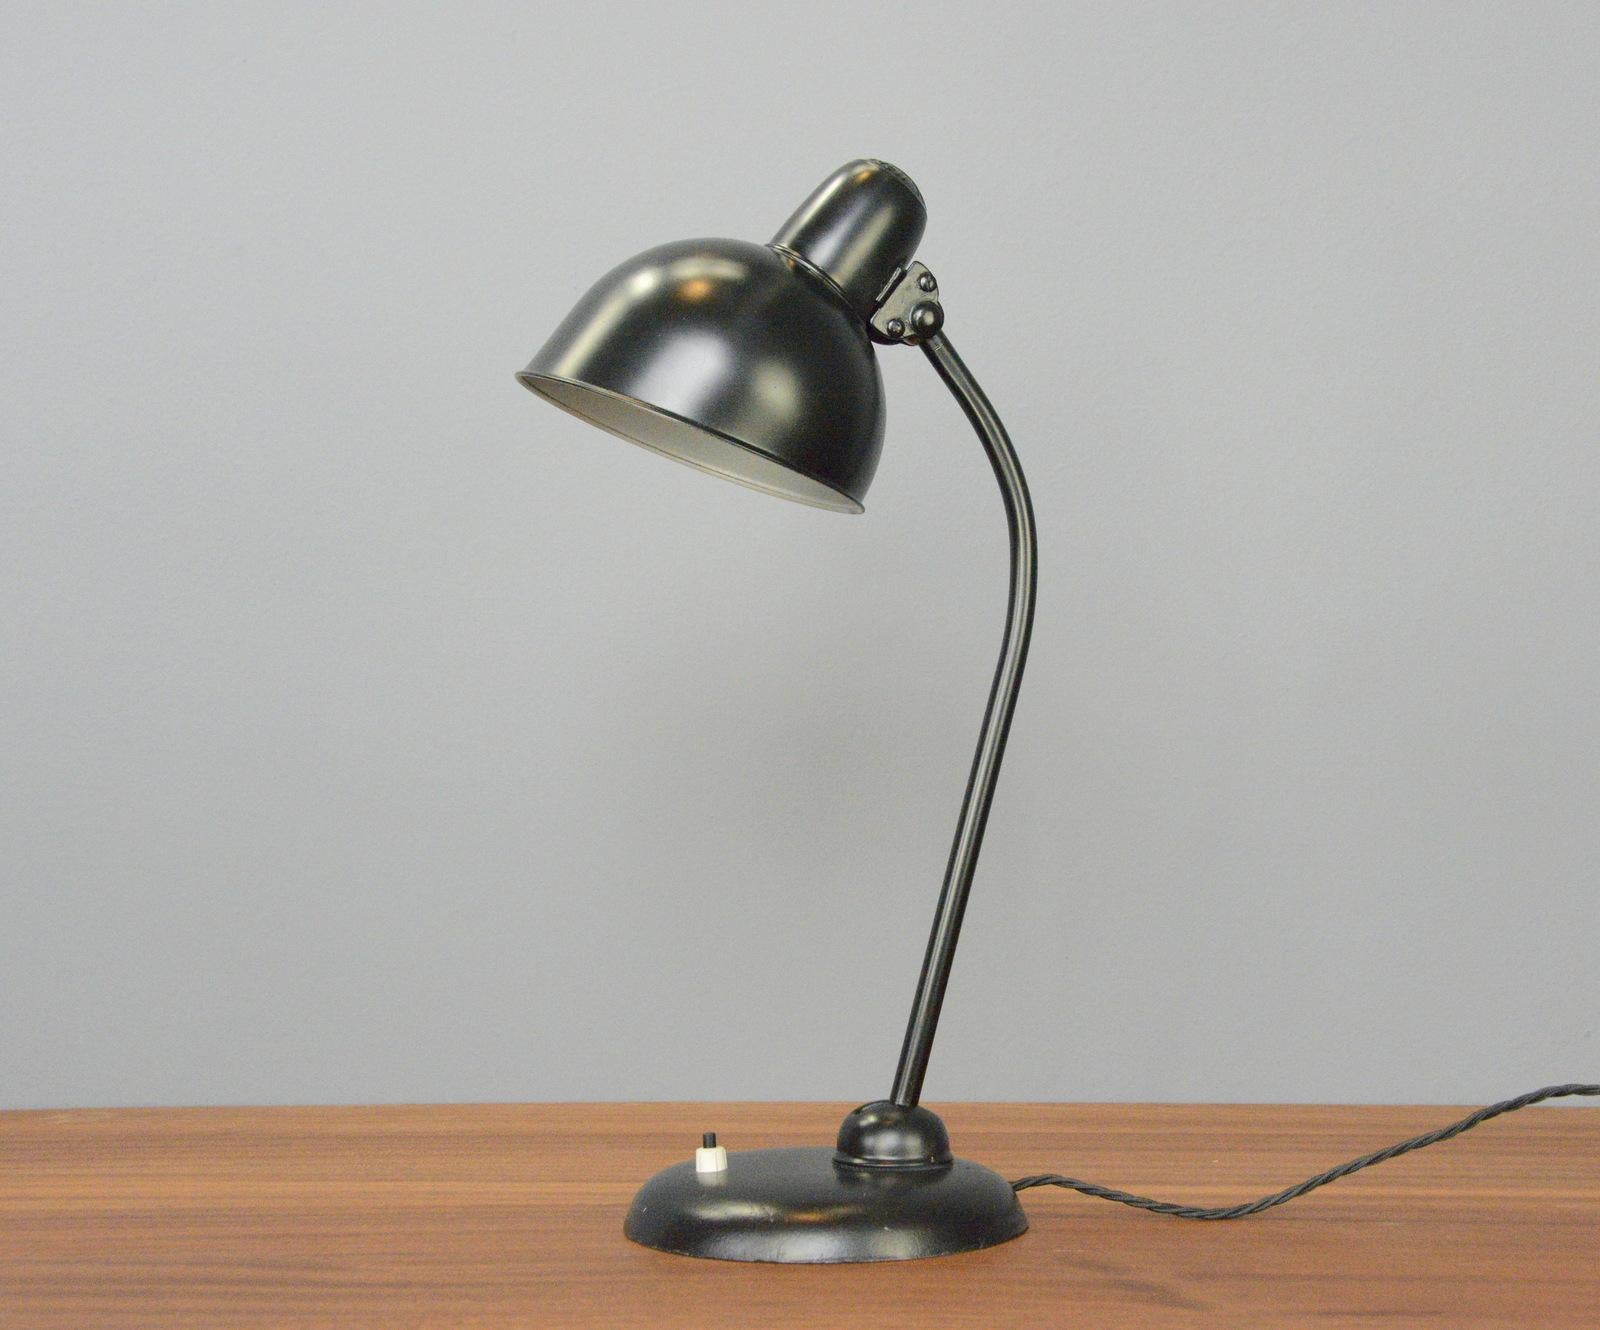 Model 6556 table lamp by Kaiser Idell Circa 1930s

- Steel shade with relief Kaiser Idell branding
- On/Off switch on the base
- Takes E27 fitting bulbs
- Adjustable arm and shade
- Designed by Christian Dell
- Model 6556 Kaiser Idell
-